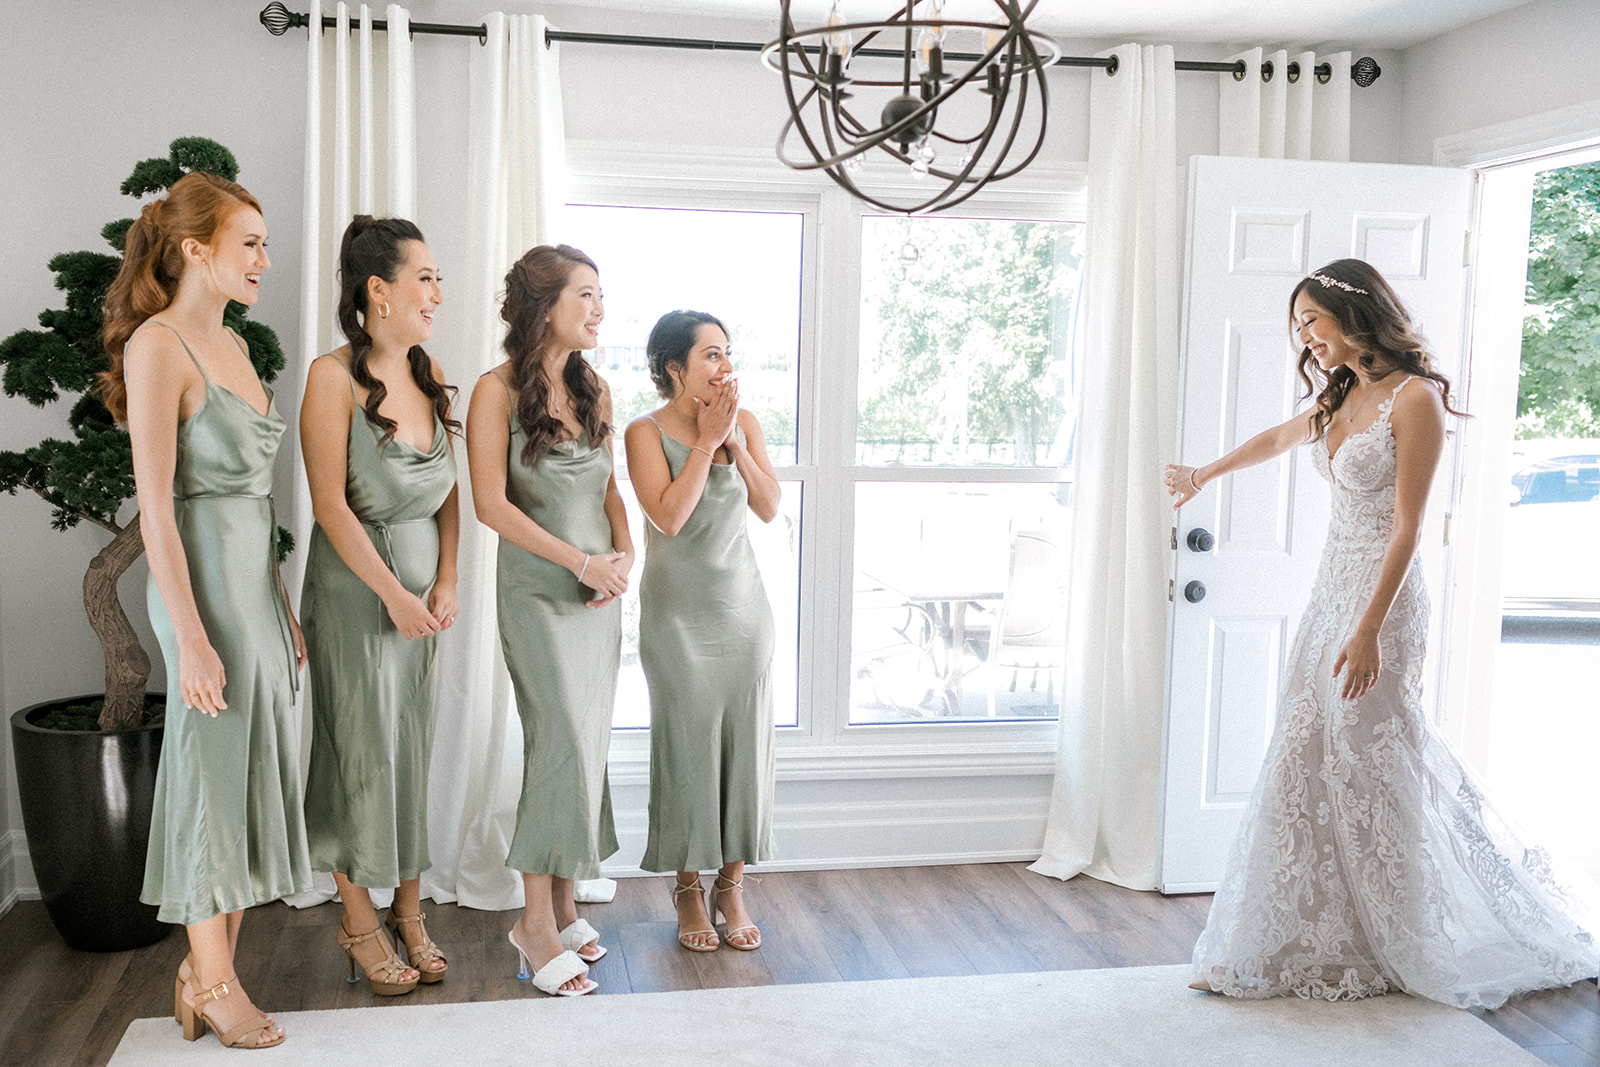 Bridesmaids react to seeing the bride for the first time on her wedding day 